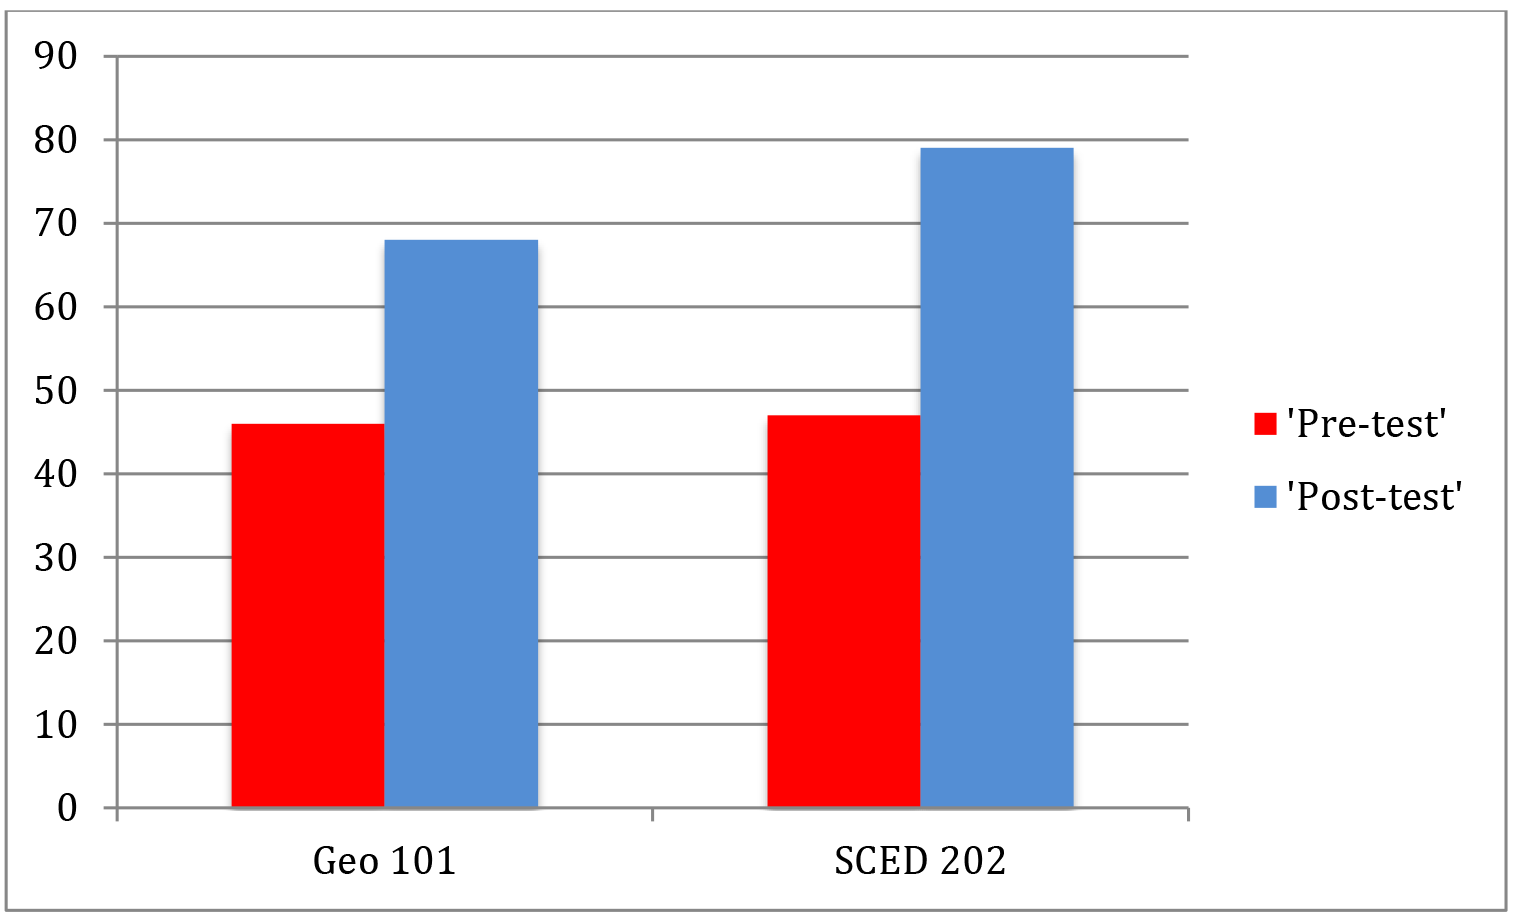 A chart showing a comparison of post-test and pre-test grades foor both GEO 101 and SCED 202